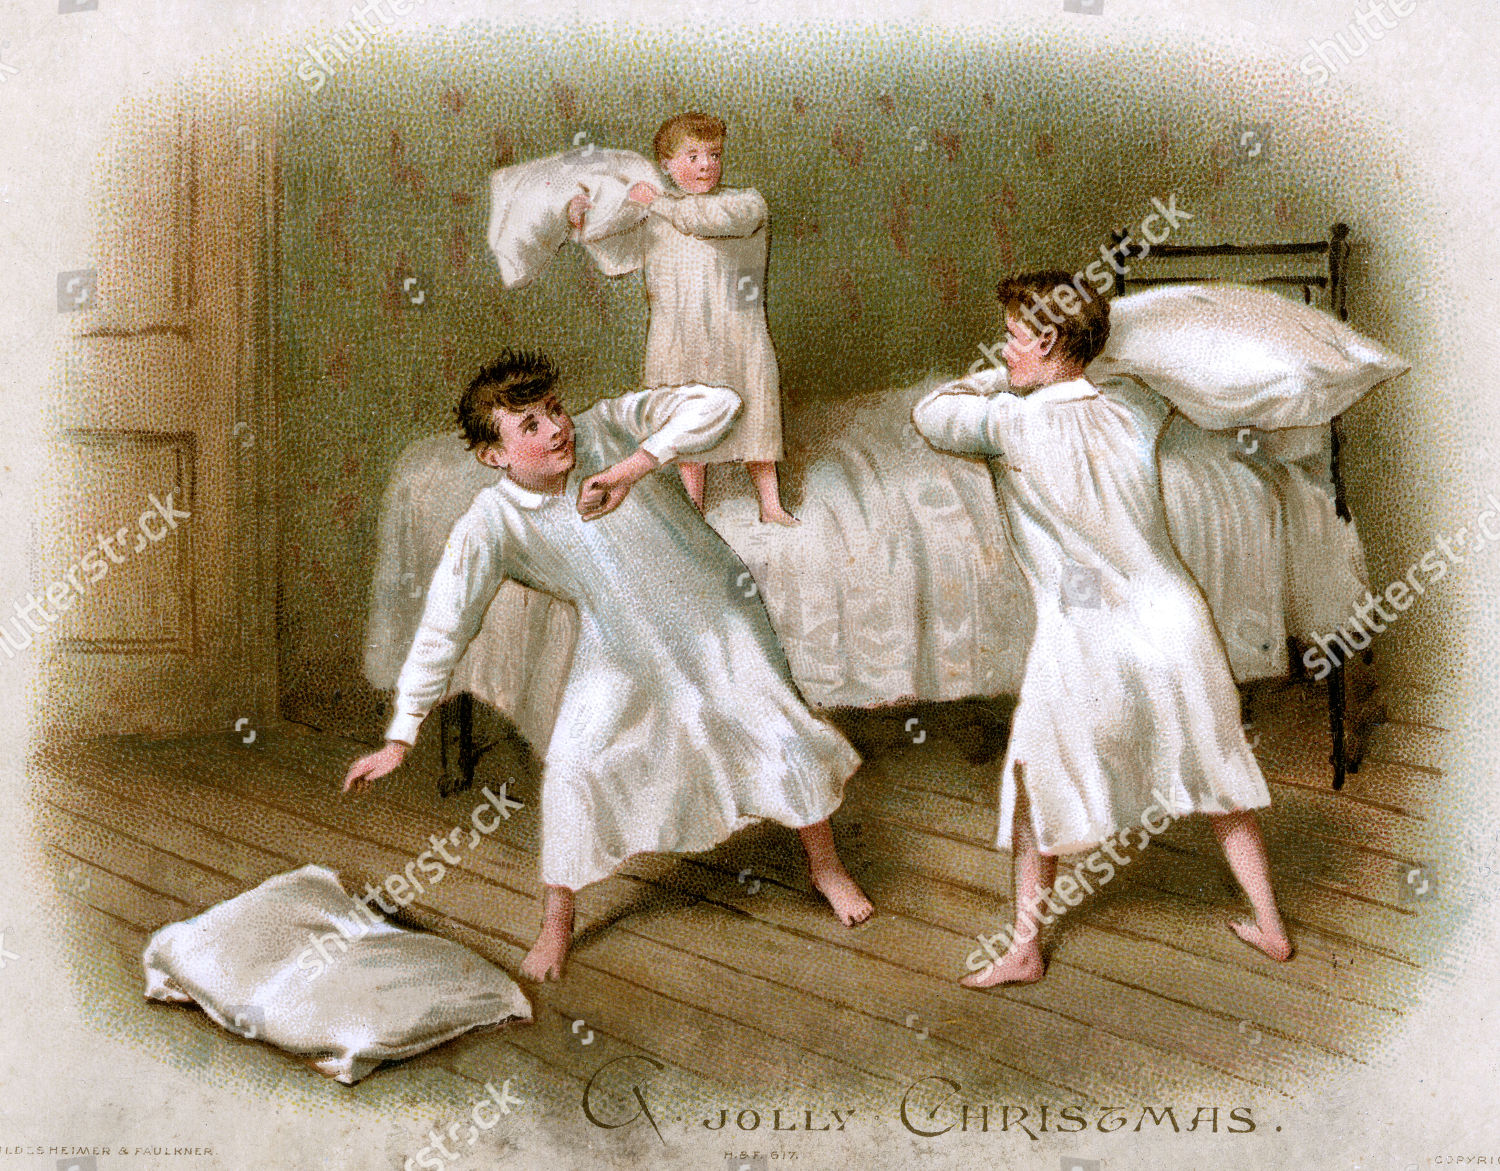 Three Boys Stage Pillow Fight Their Nightgowns Editorial Stock Photo -  Stock Image | Shutterstock